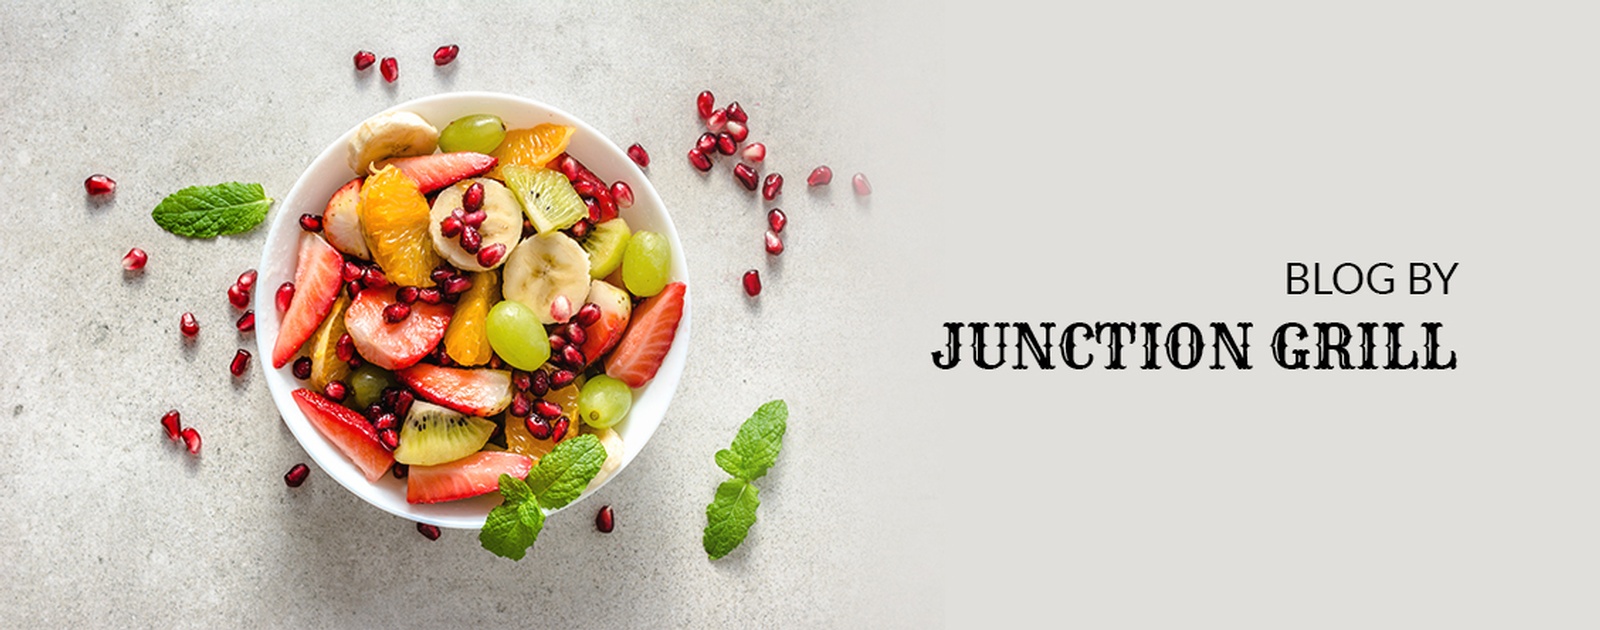 Blog by Junction Grill